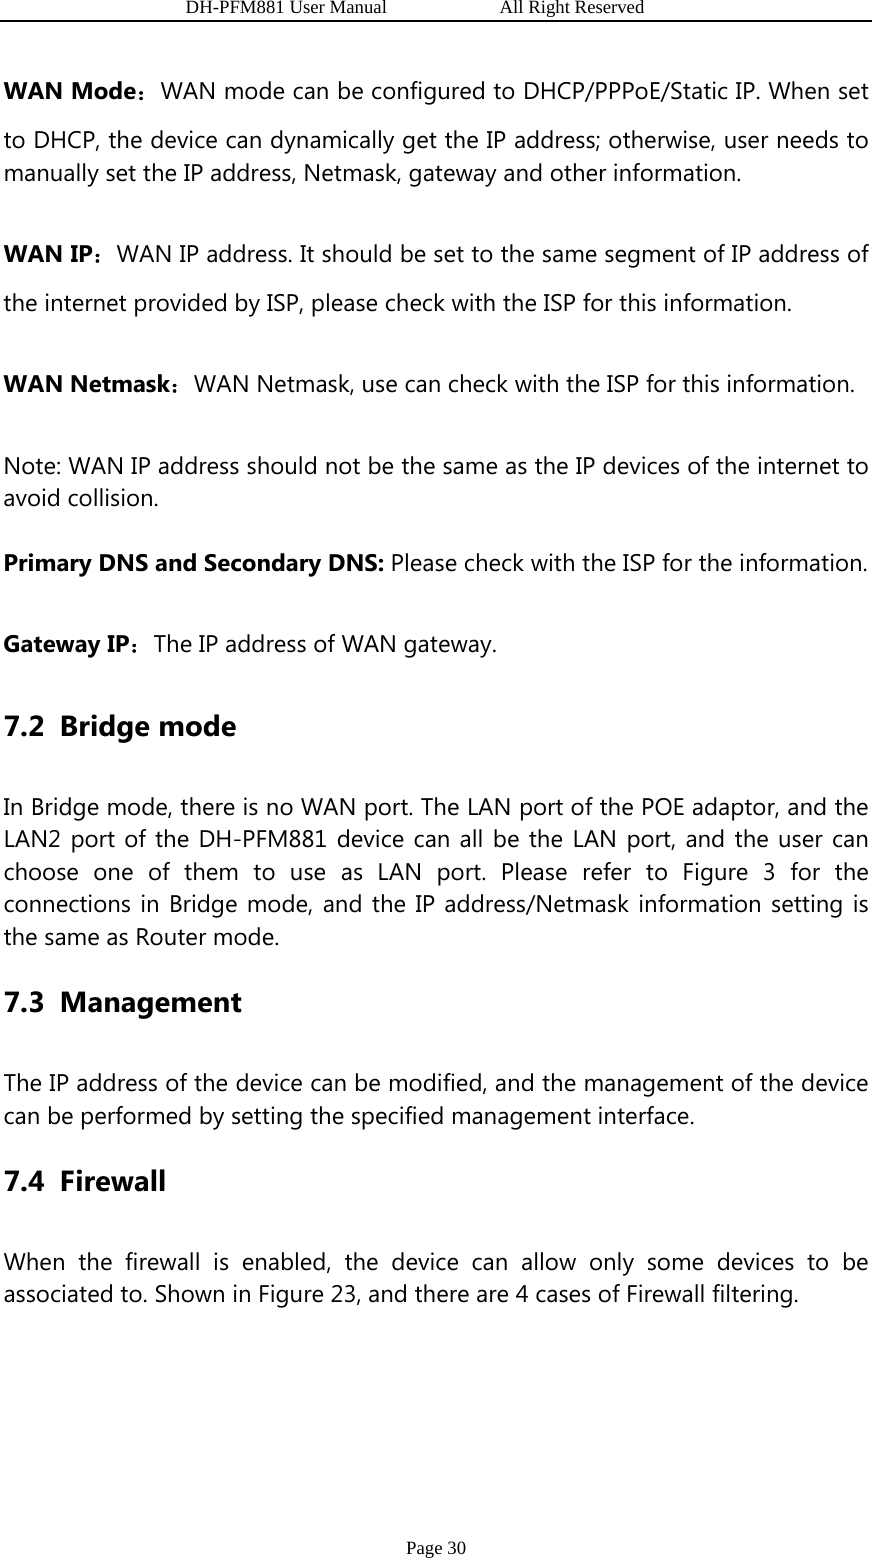                   DH-PFM881 User Manual            All Right Reserved Page 30 WAN Mode：WAN mode can be configured to DHCP/PPPoE/Static IP. When set to DHCP, the device can dynamically get the IP address; otherwise, user needs to manually set the IP address, Netmask, gateway and other information. WAN IP：WAN IP address. It should be set to the same segment of IP address of the internet provided by ISP, please check with the ISP for this information. WAN Netmask：WAN Netmask, use can check with the ISP for this information. Note: WAN IP address should not be the same as the IP devices of the internet to avoid collision. Primary DNS and Secondary DNS: Please check with the ISP for the information. Gateway IP：The IP address of WAN gateway. 7.2 Bridge mode In Bridge mode, there is no WAN port. The LAN port of the POE adaptor, and the LAN2 port of the DH-PFM881 device can all be the LAN port, and the user can choose one of them to use as LAN port. Please refer to Figure 3 for the connections in Bridge mode, and the IP address/Netmask information setting is the same as Router mode. 7.3 Management The IP address of the device can be modified, and the management of the device can be performed by setting the specified management interface.   7.4 Firewall When the firewall is enabled, the device can allow only some devices to be associated to. Shown in Figure 23, and there are 4 cases of Firewall filtering.   